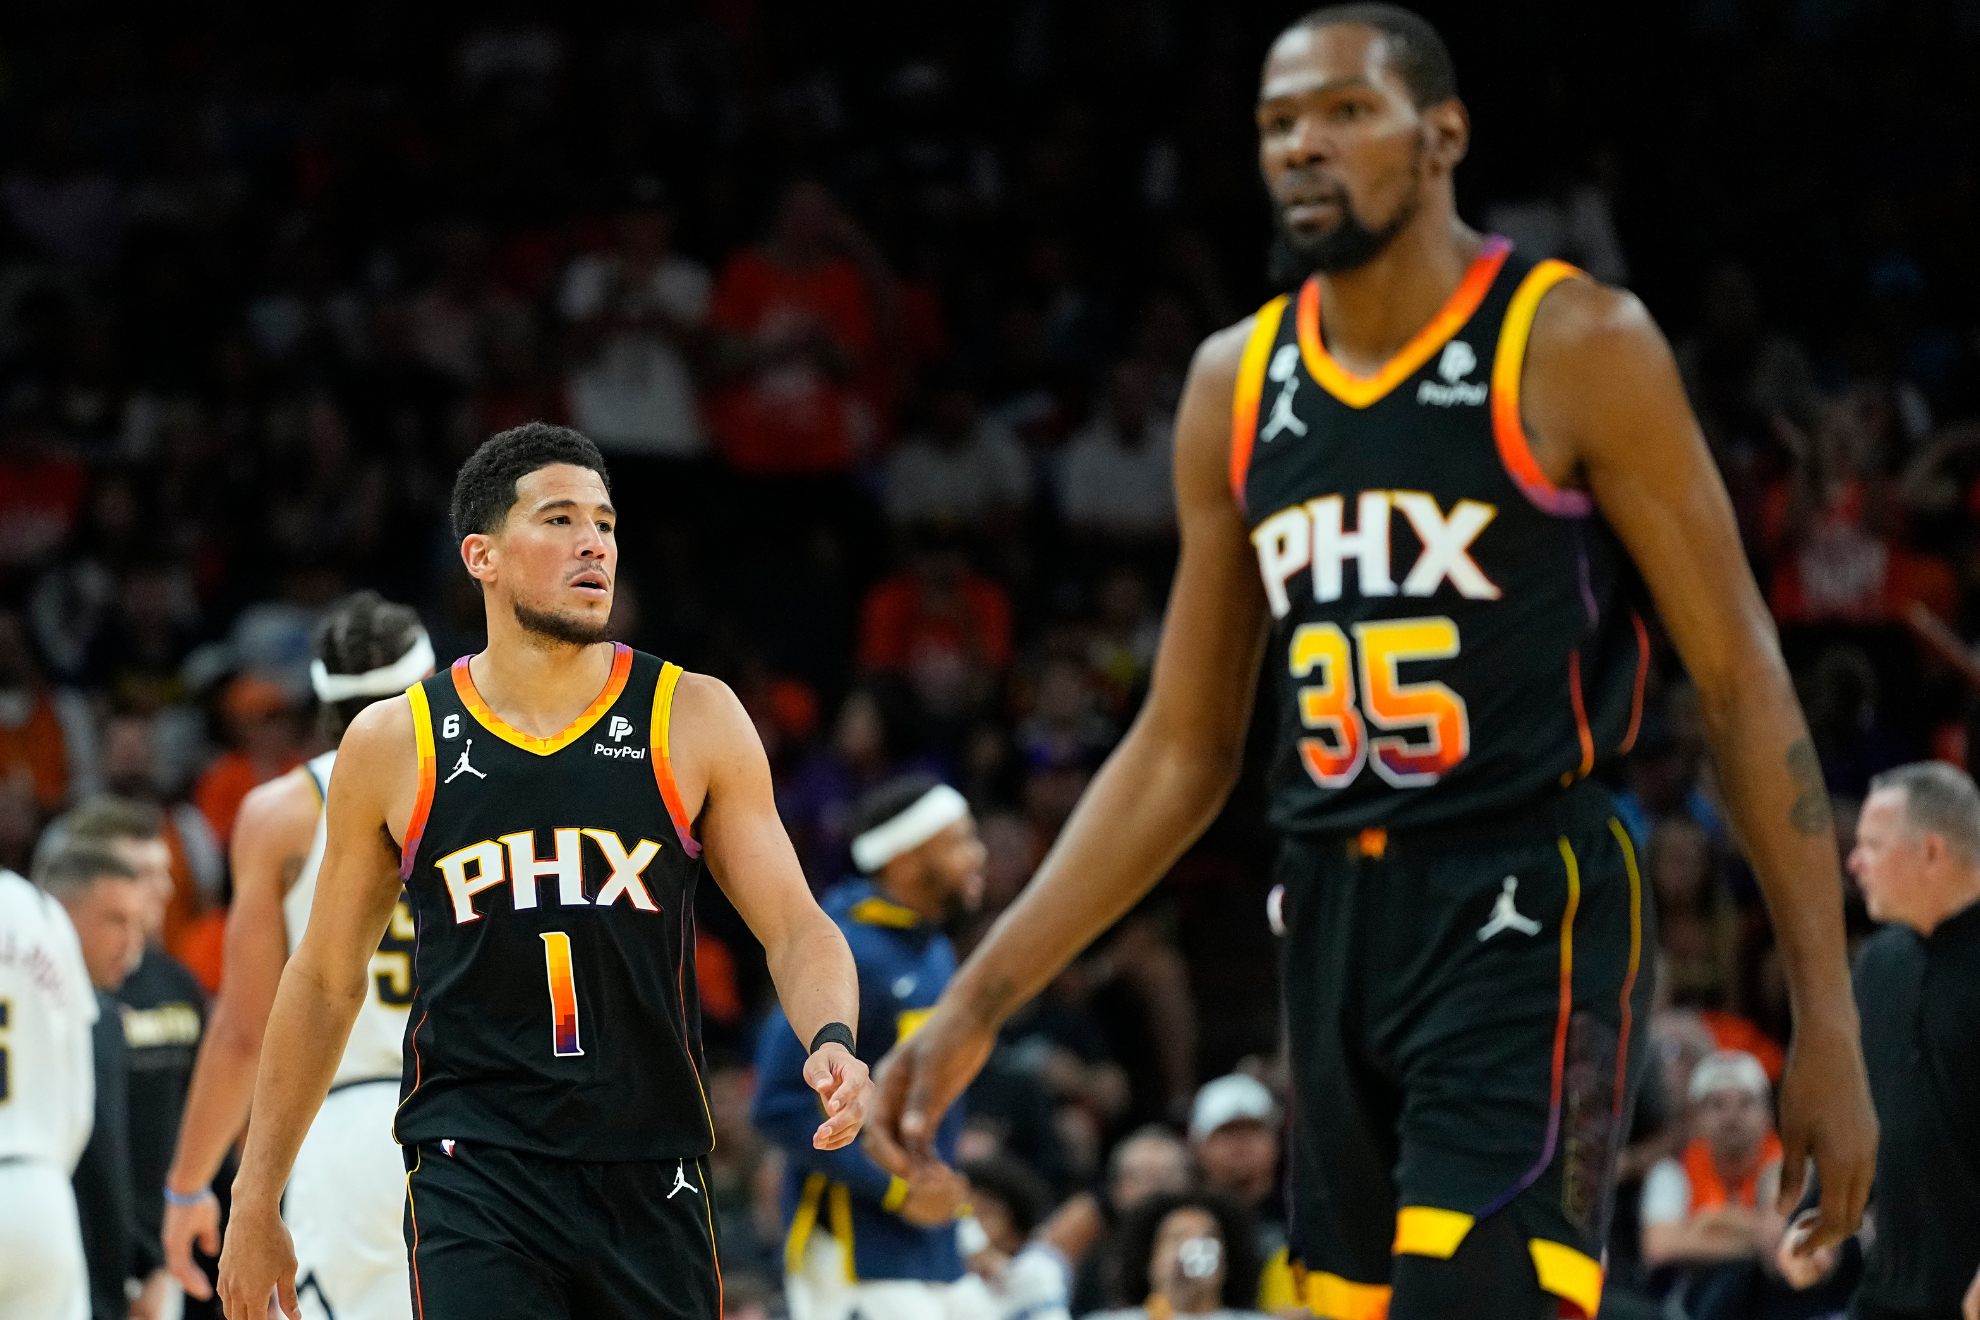 The pressure is on for Devin Booker and Kevin Durant to lead Phoenix to a championship.